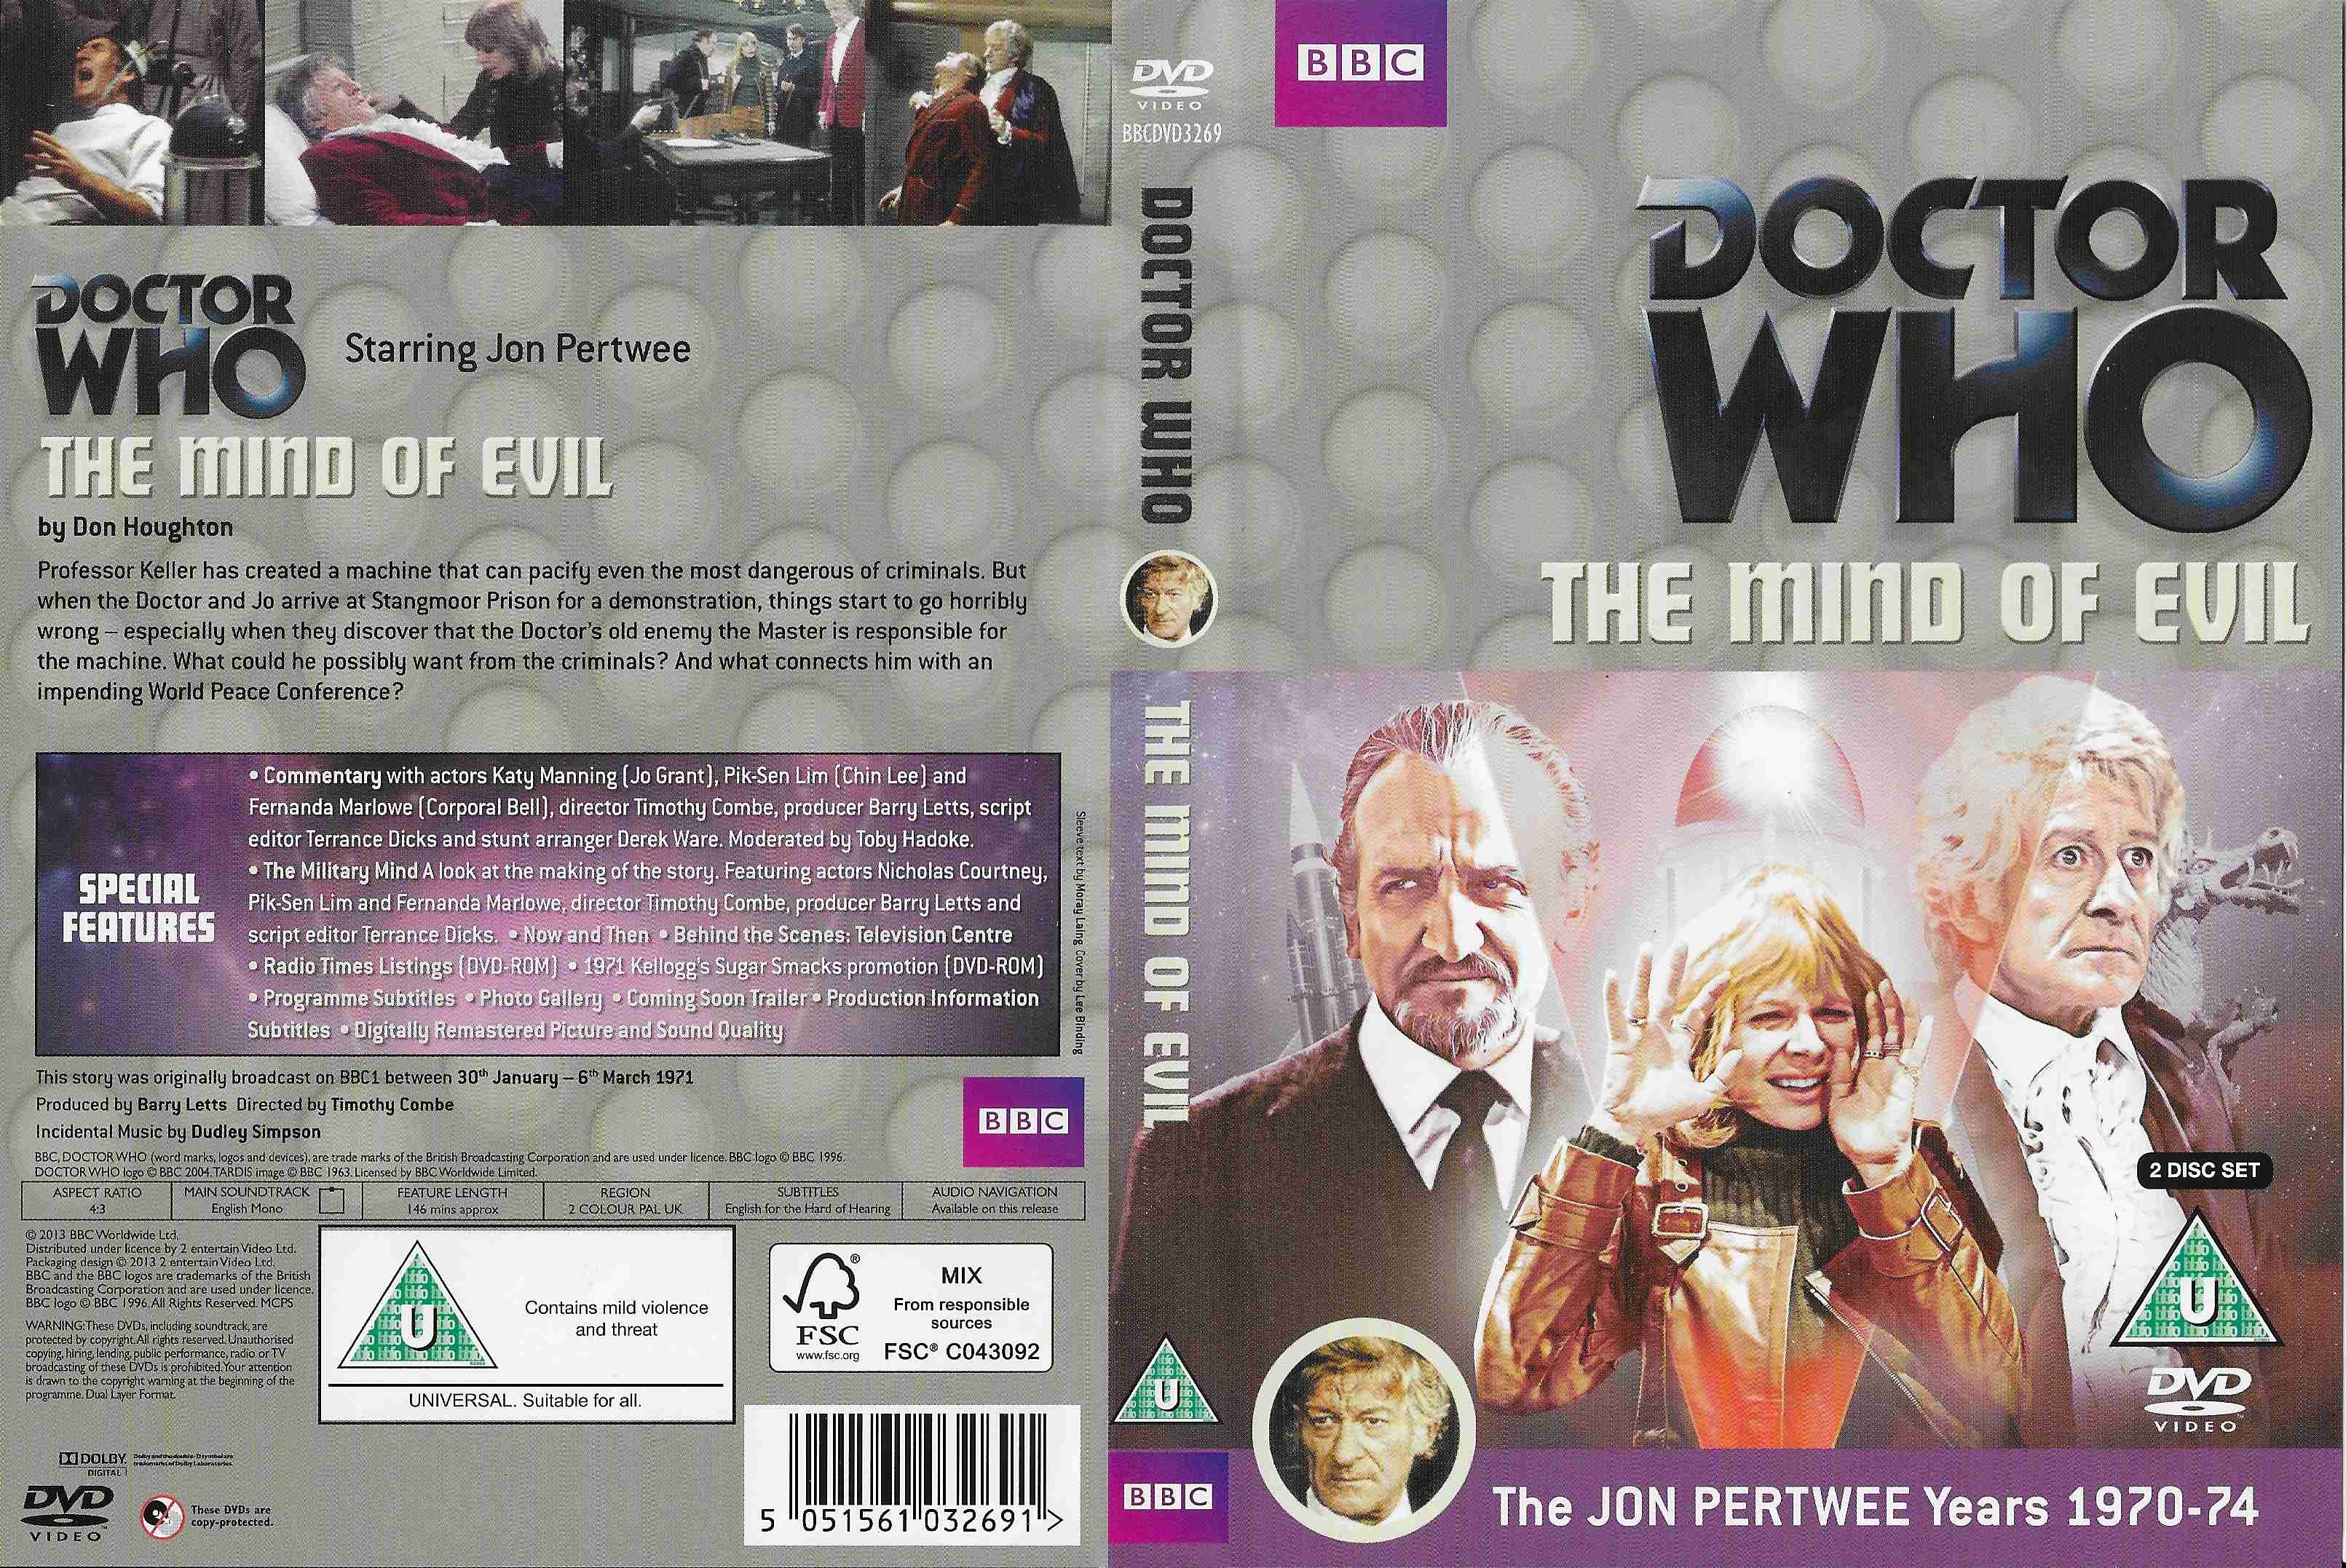 Picture of BBCDVD 3269 Doctor Who - The mind of evil by artist Robert Holmes from the BBC records and Tapes library